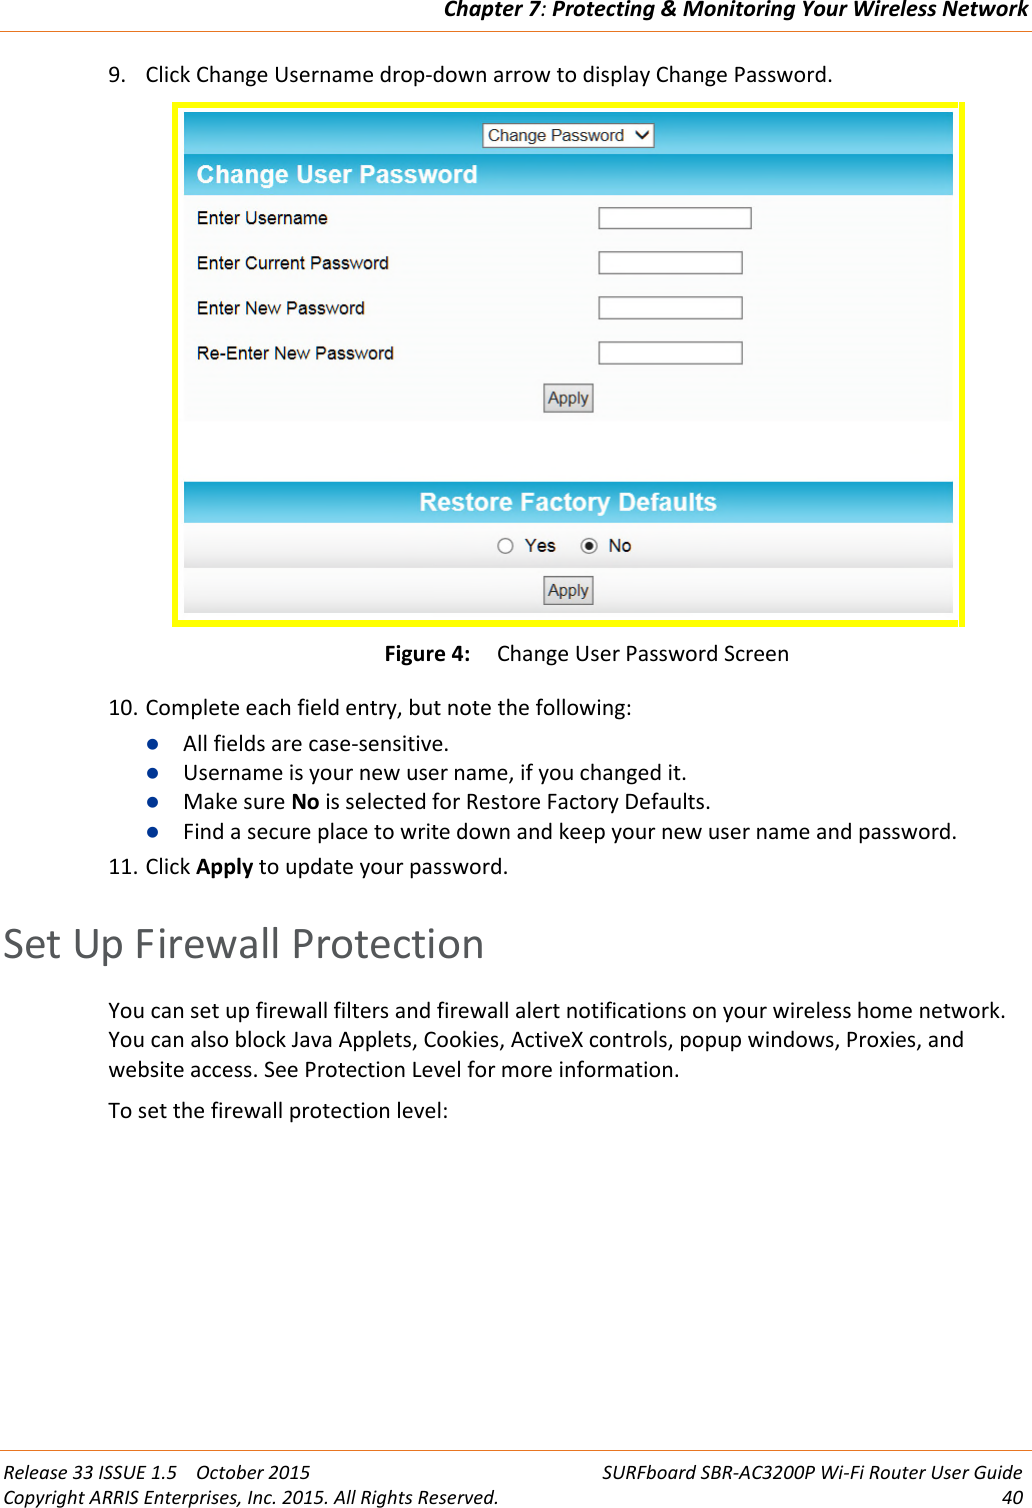 Chapter 7:Protecting &amp; Monitoring Your Wireless NetworkRelease 33 ISSUE 1.5 October 2015 SURFboard SBR-AC3200P Wi-Fi Router User GuideCopyright ARRIS Enterprises, Inc. 2015. All Rights Reserved. 409. Click Change Username drop-down arrow to display Change Password.Figure 4: Change User Password Screen10. Complete each field entry, but note the following:All fields are case-sensitive.Username is your new user name, if you changed it.Make sure No is selected for Restore Factory Defaults.Find a secure place to write down and keep your new user name and password.11. Click Apply to update your password.Set Up Firewall ProtectionYou can set up firewall filters and firewall alert notifications on your wireless home network.You can also block Java Applets, Cookies, ActiveX controls, popup windows, Proxies, andwebsite access. See Protection Level for more information.To set the firewall protection level: